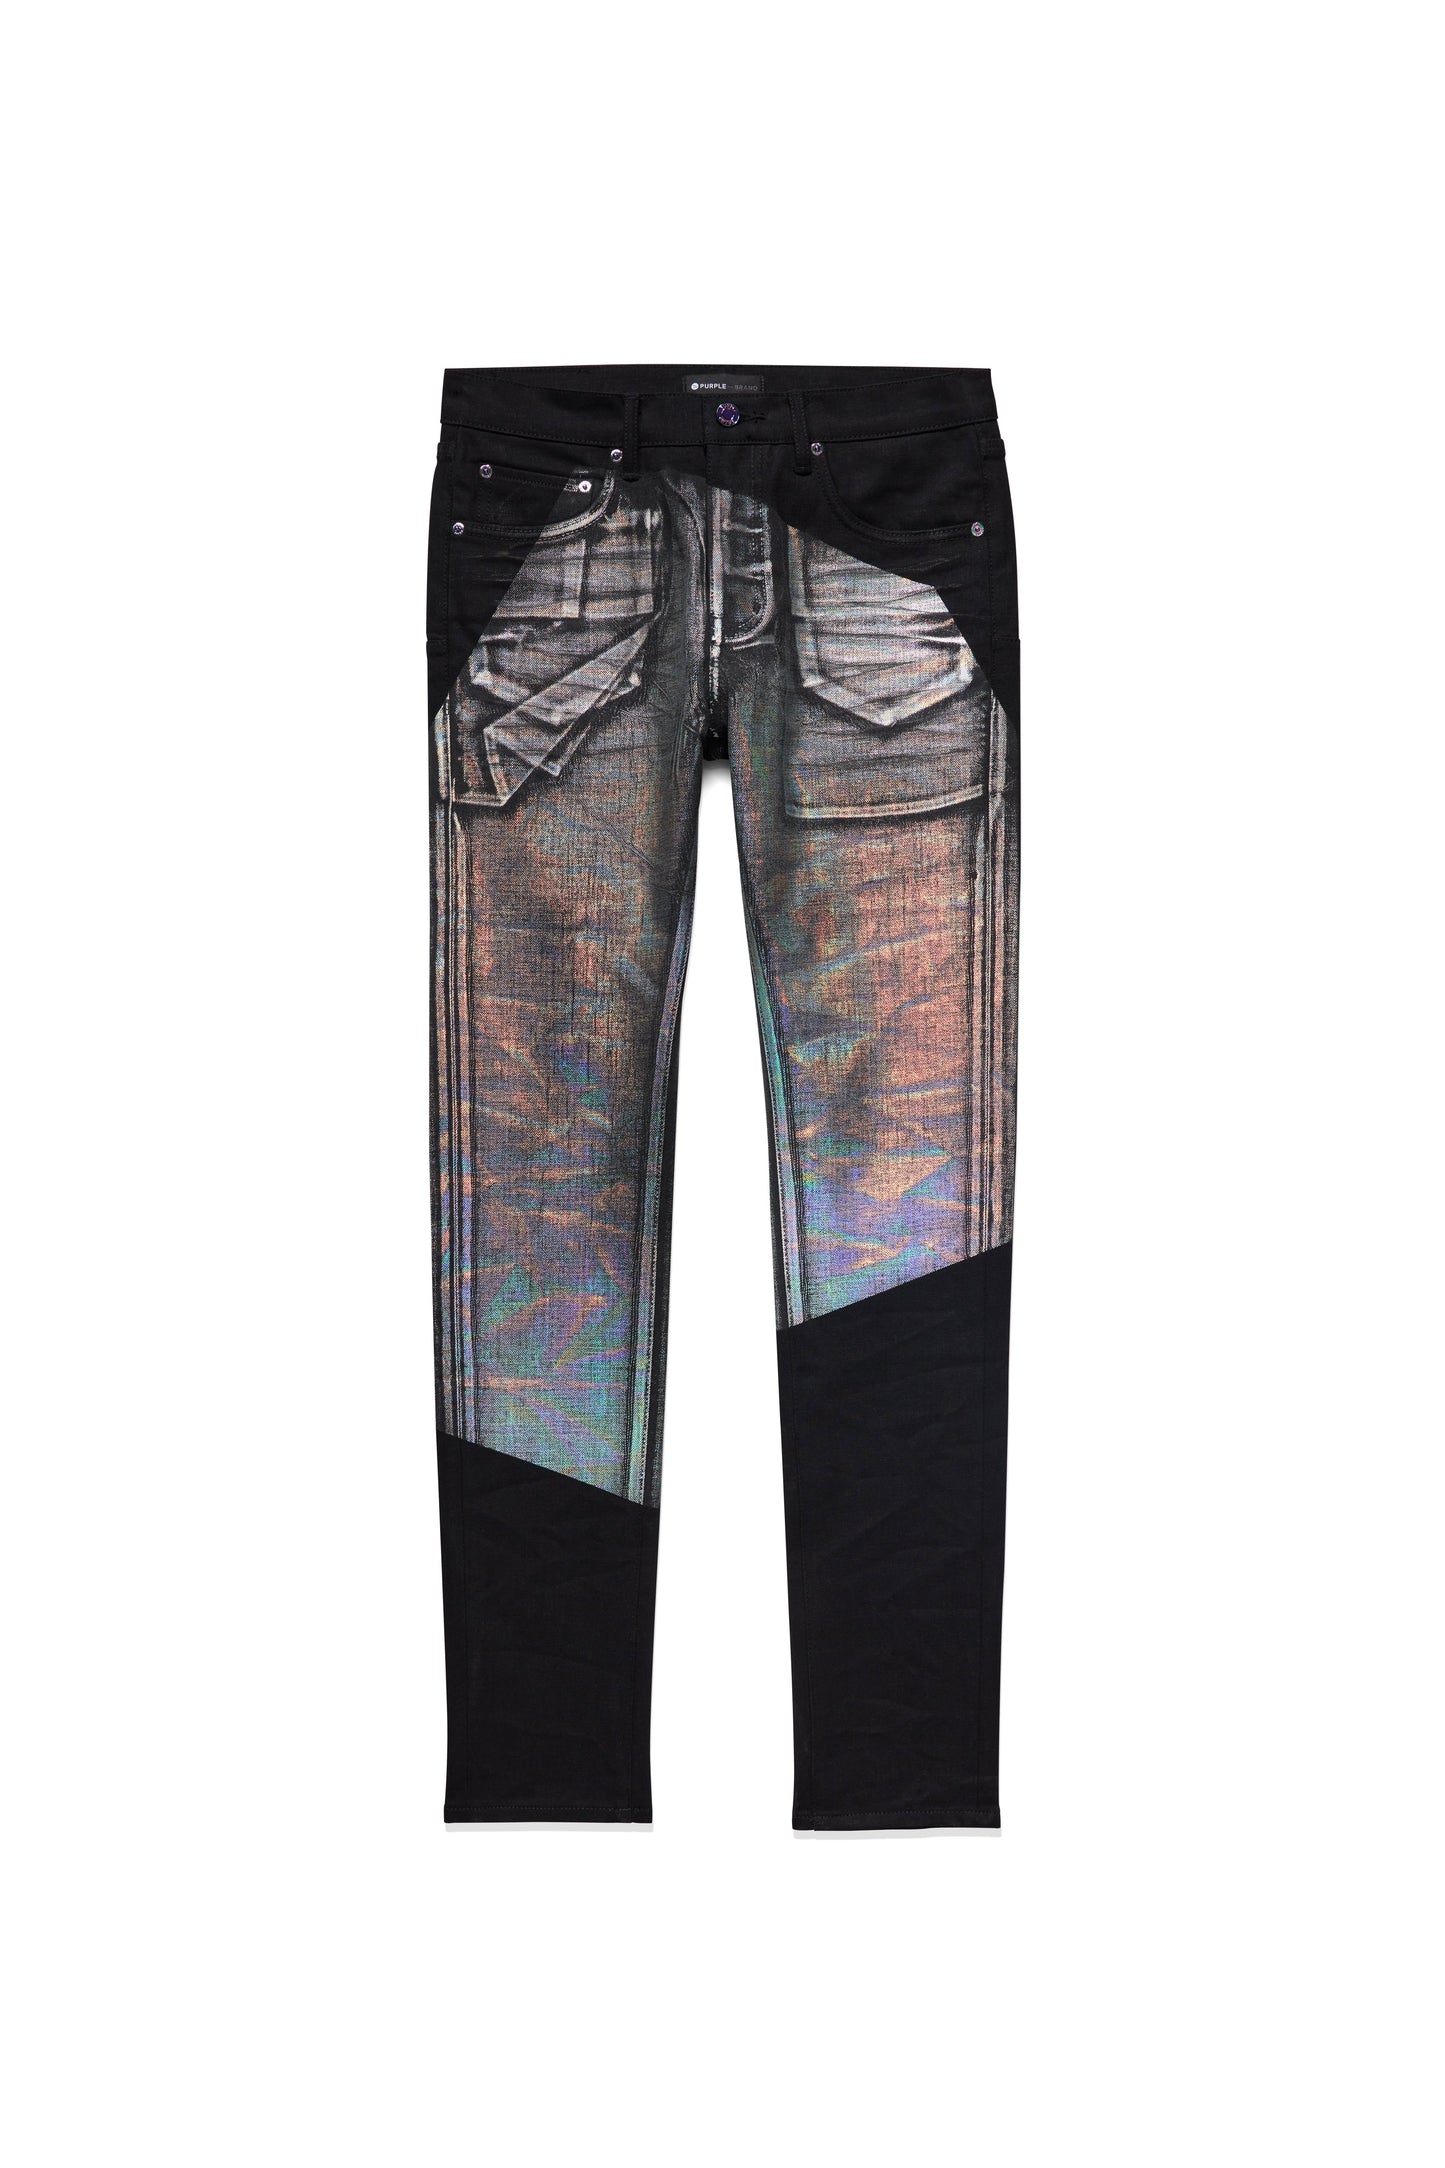 P001 LOW RISE SKINNY JEAN - Holographic Fragment Over Black